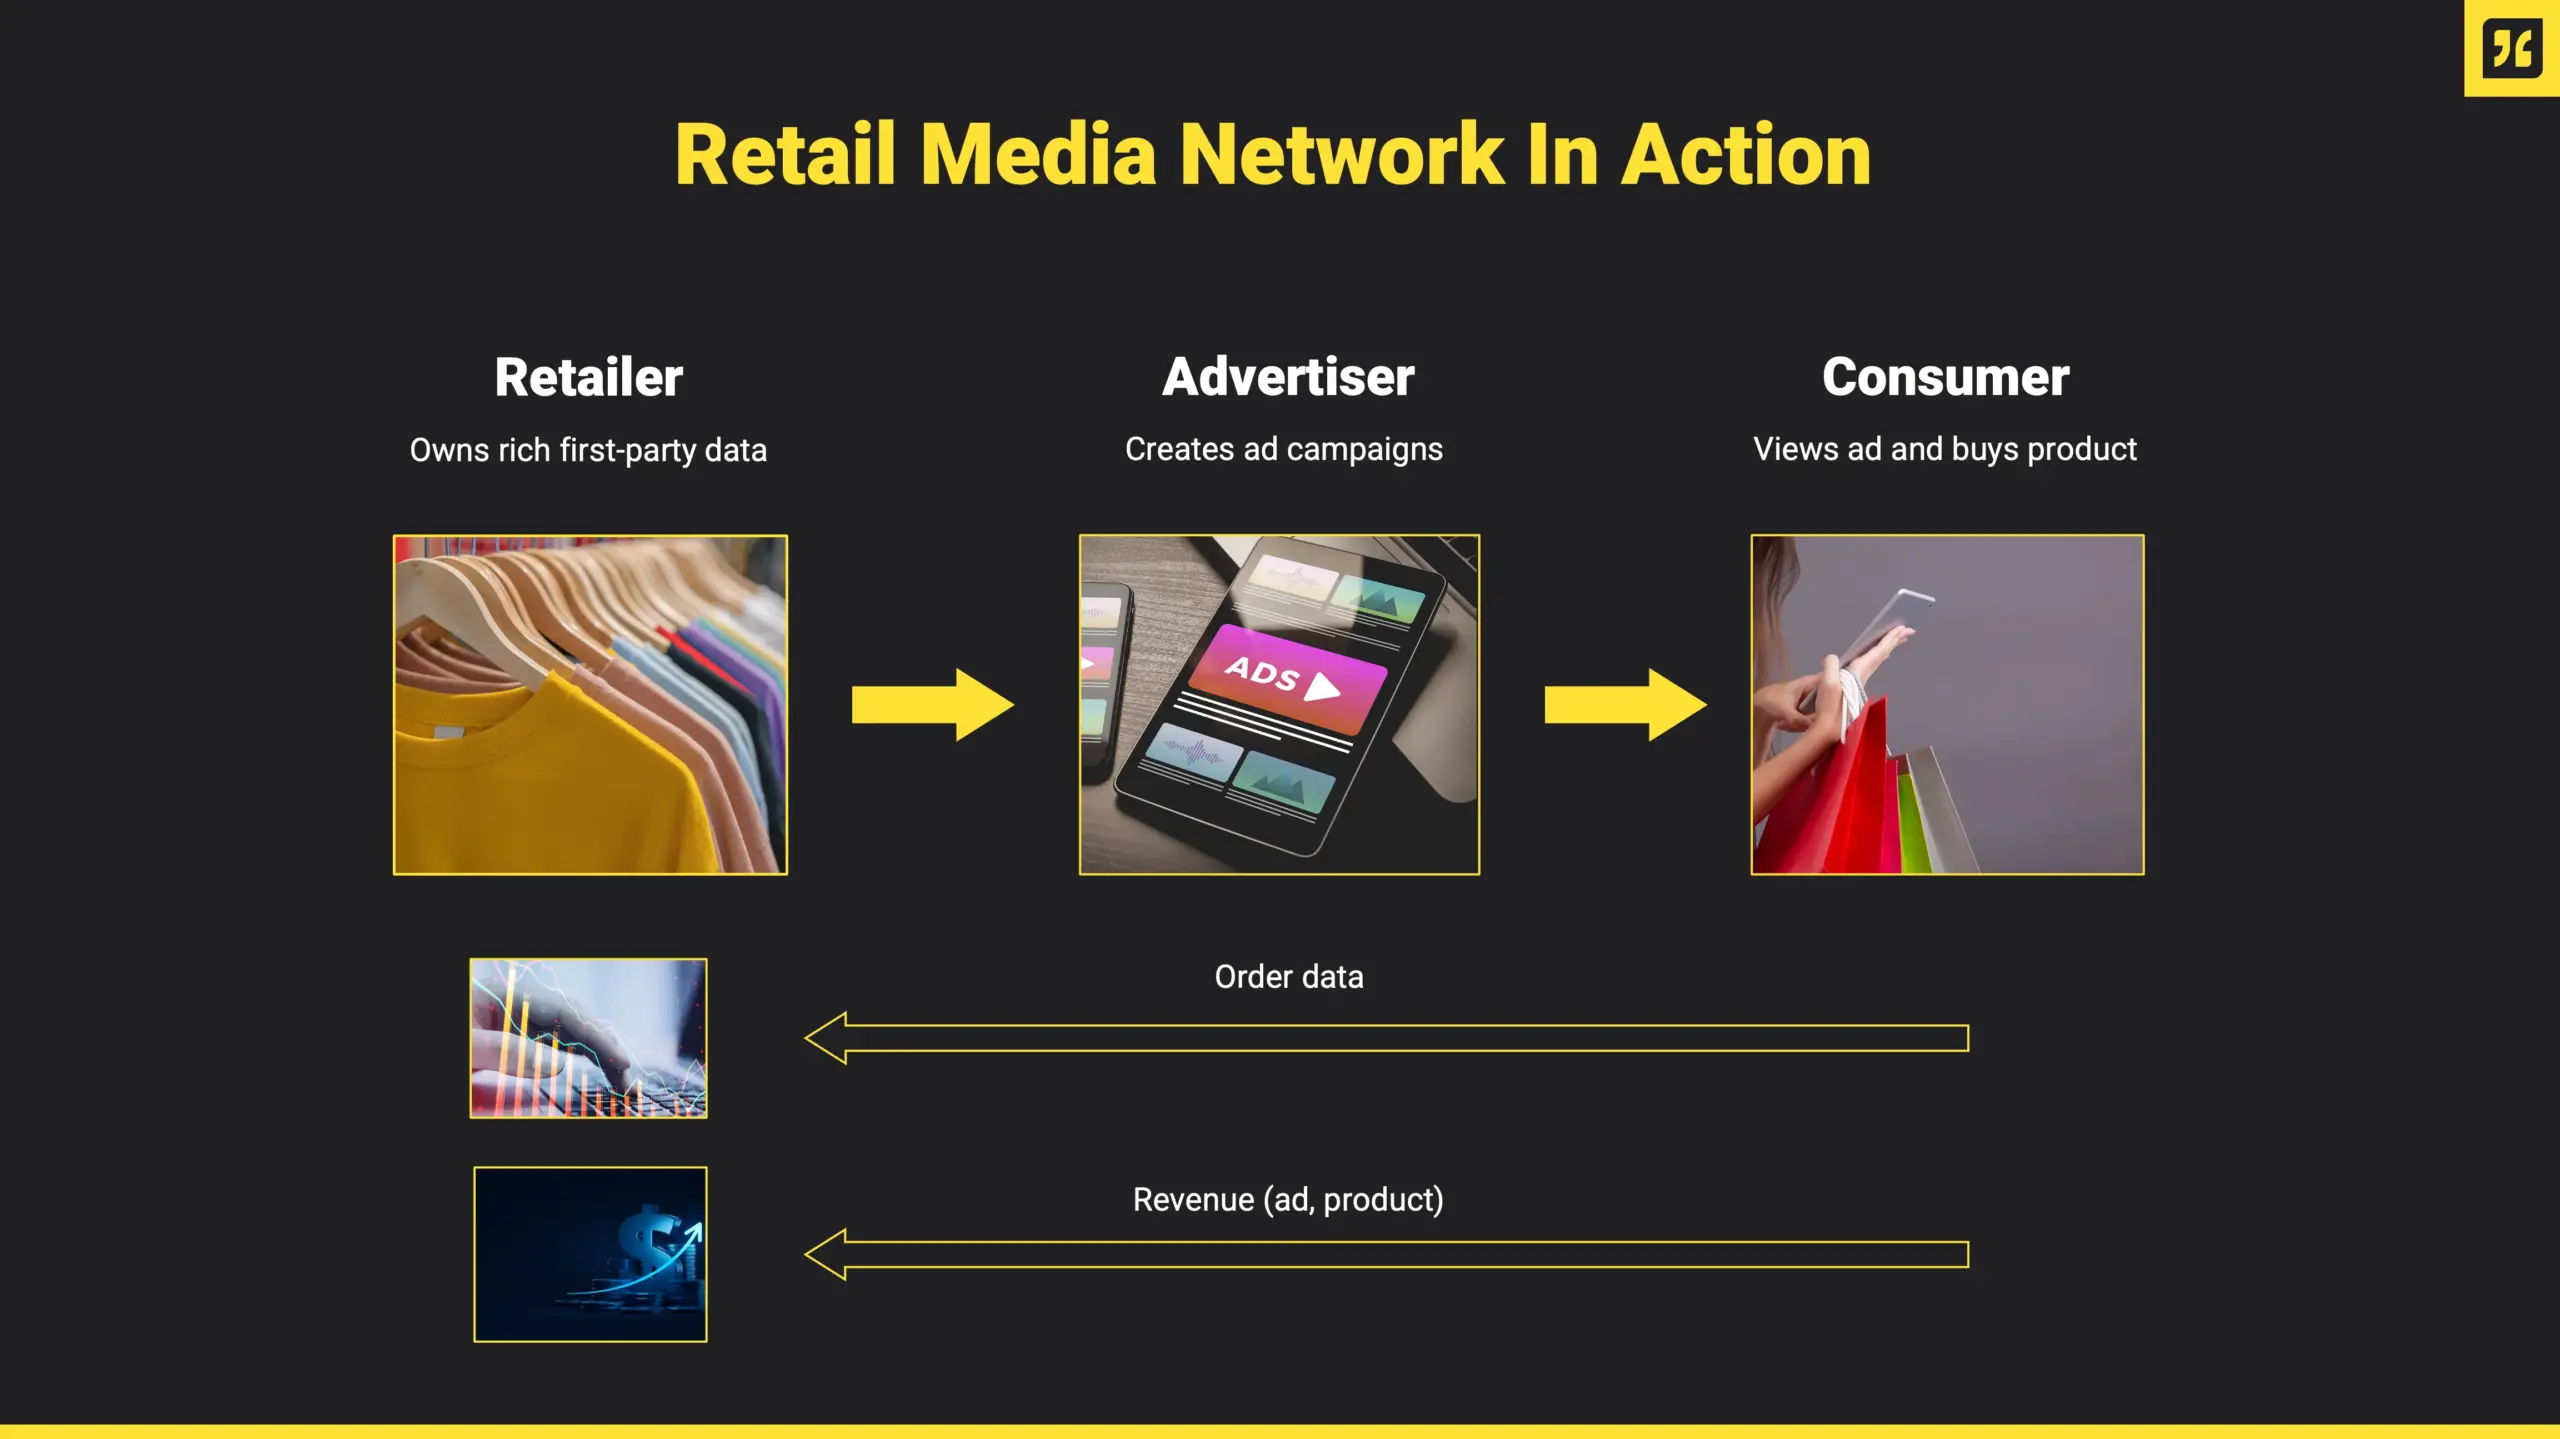 How retail media networks operate